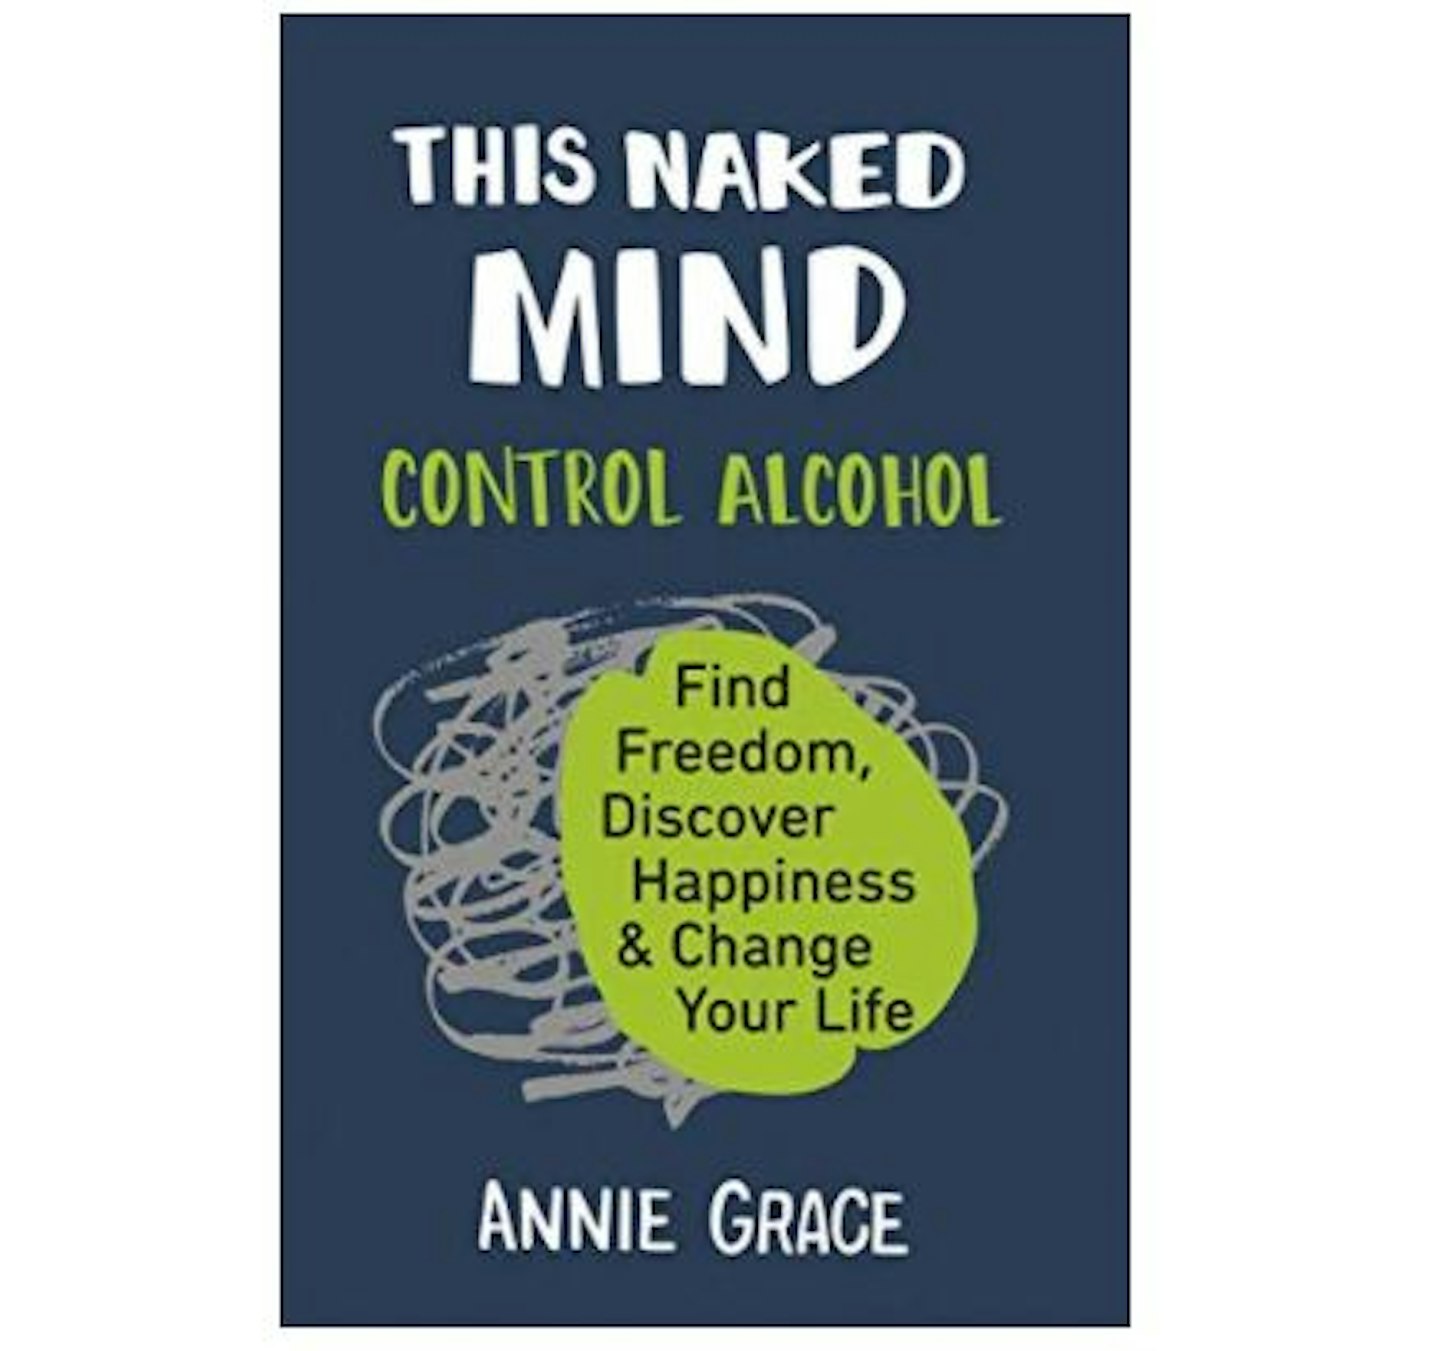 This Naked Mind: Control Alcohol by Annie Grace